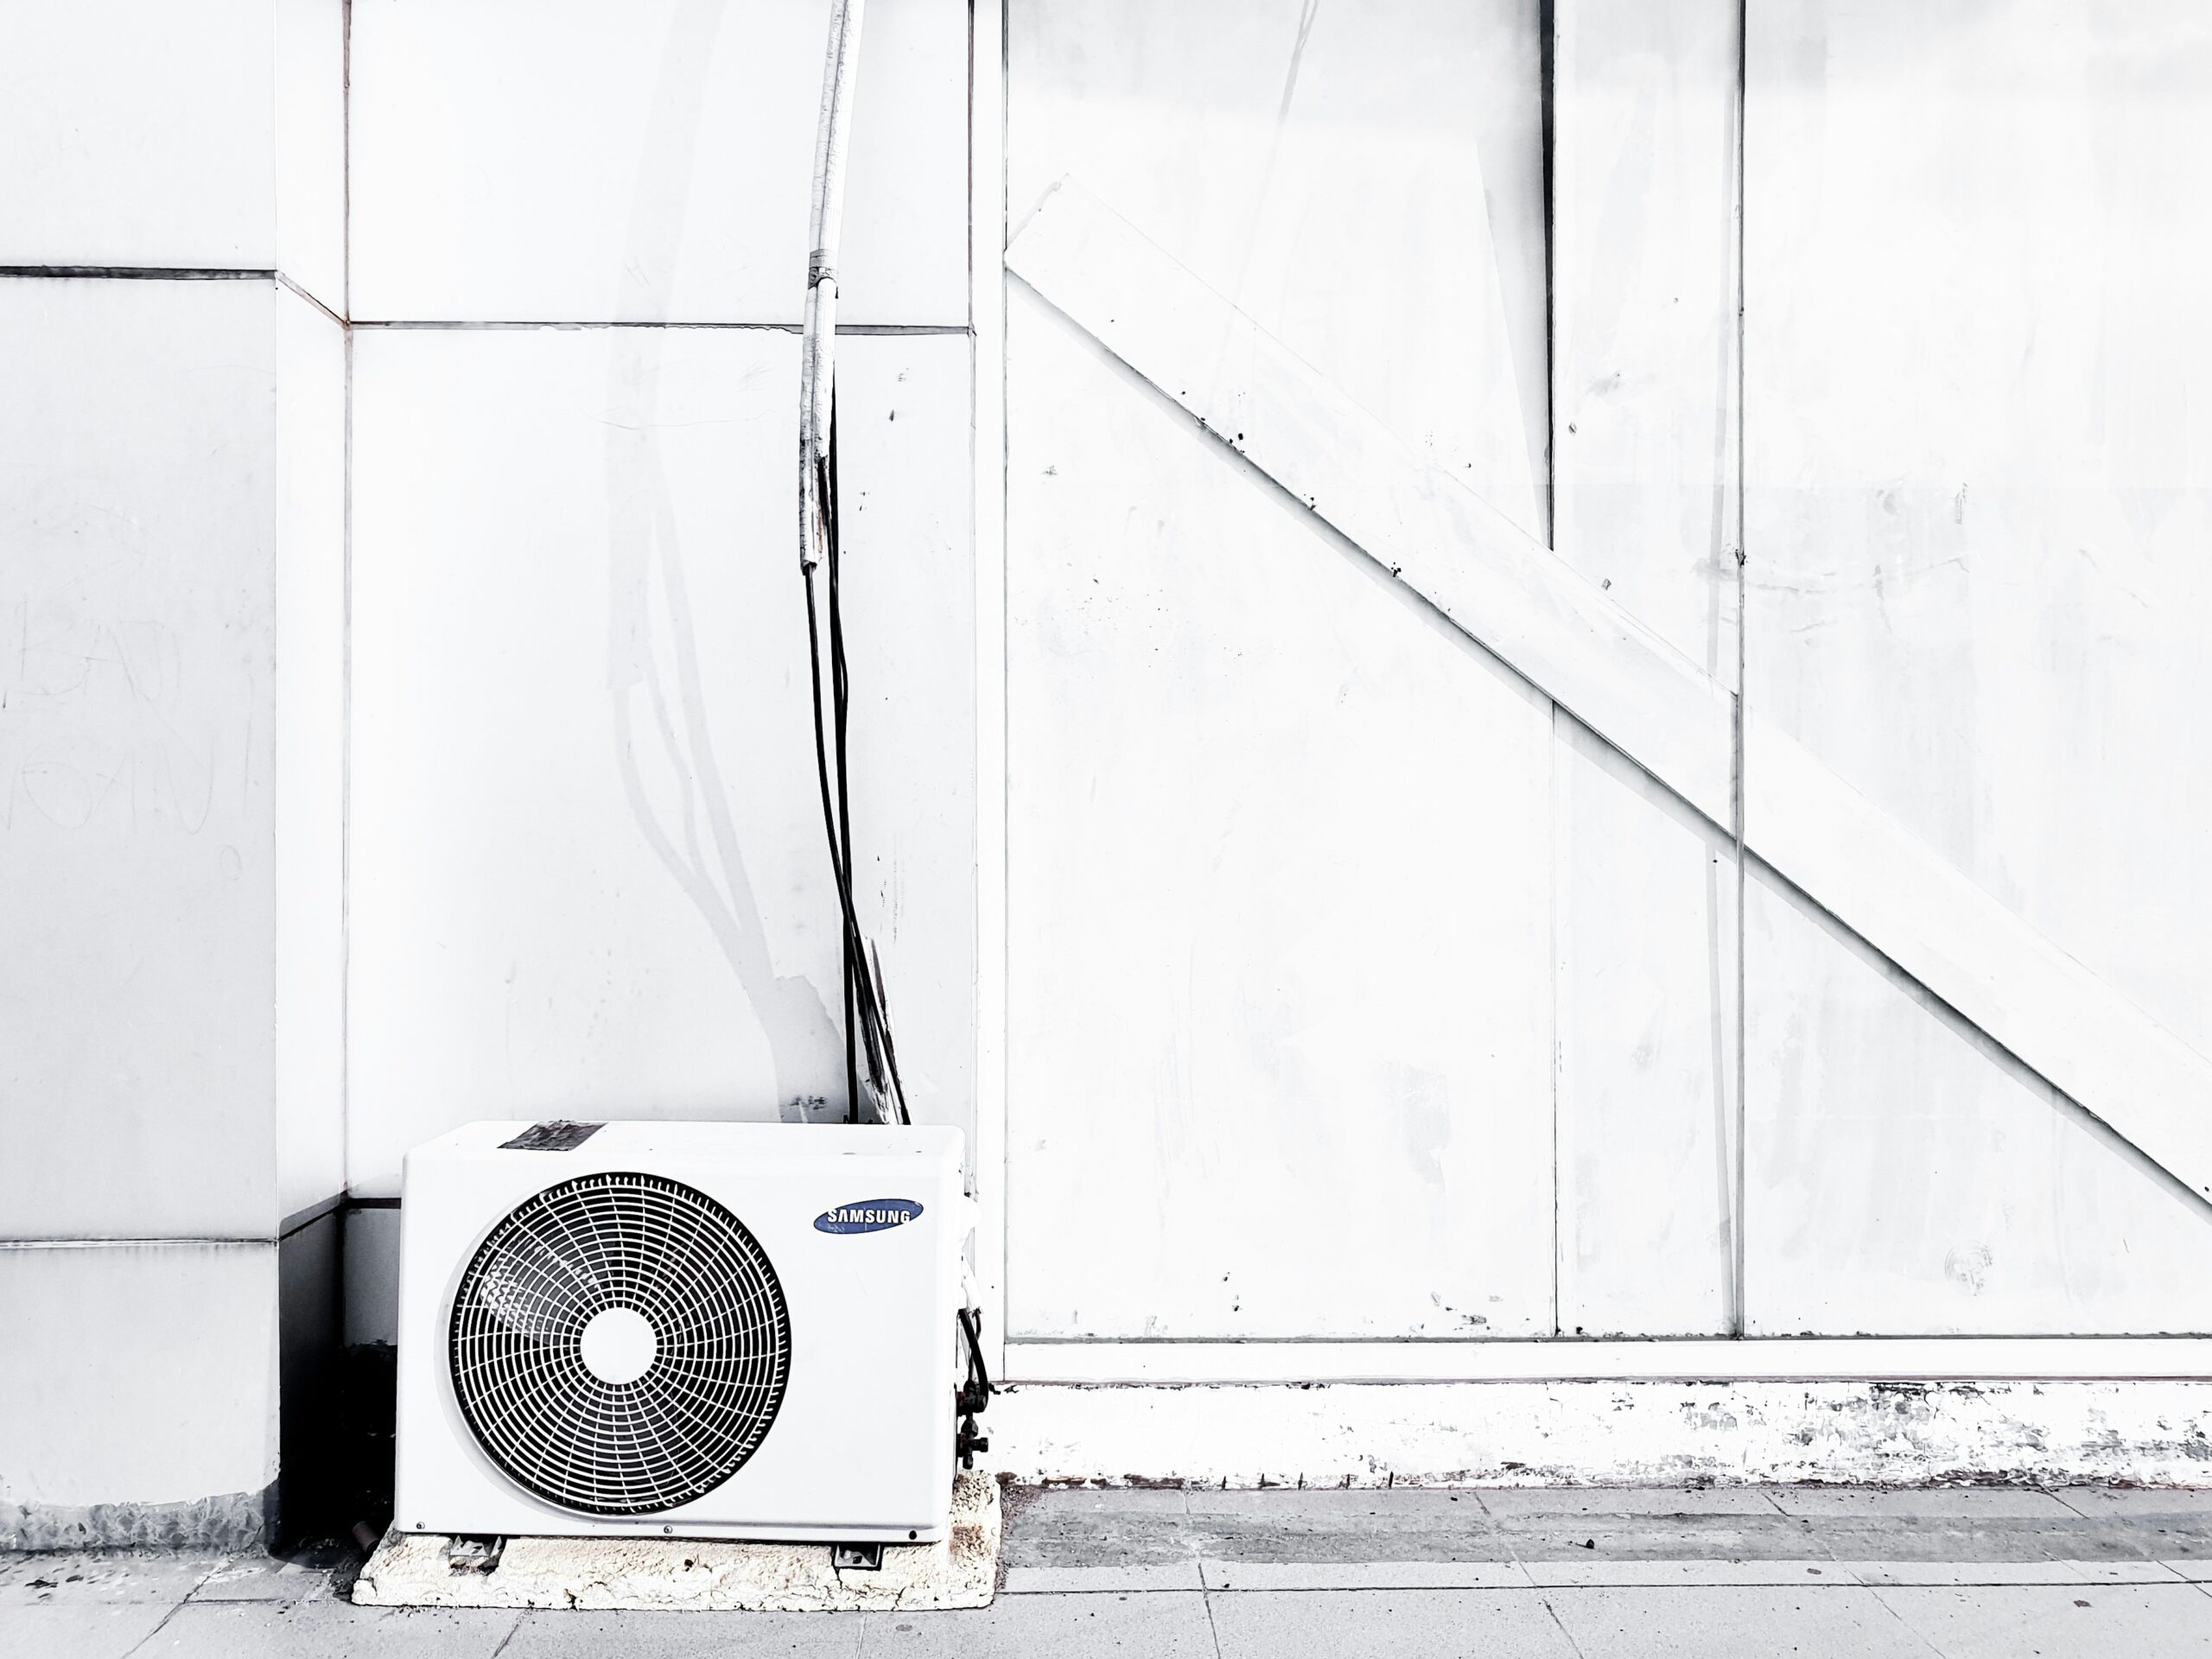 find the perfect air conditioner for your home or office with our wide selection of energy-efficient, high-performance units. stay cool and comfortable all year round with our top-quality air conditioning systems.